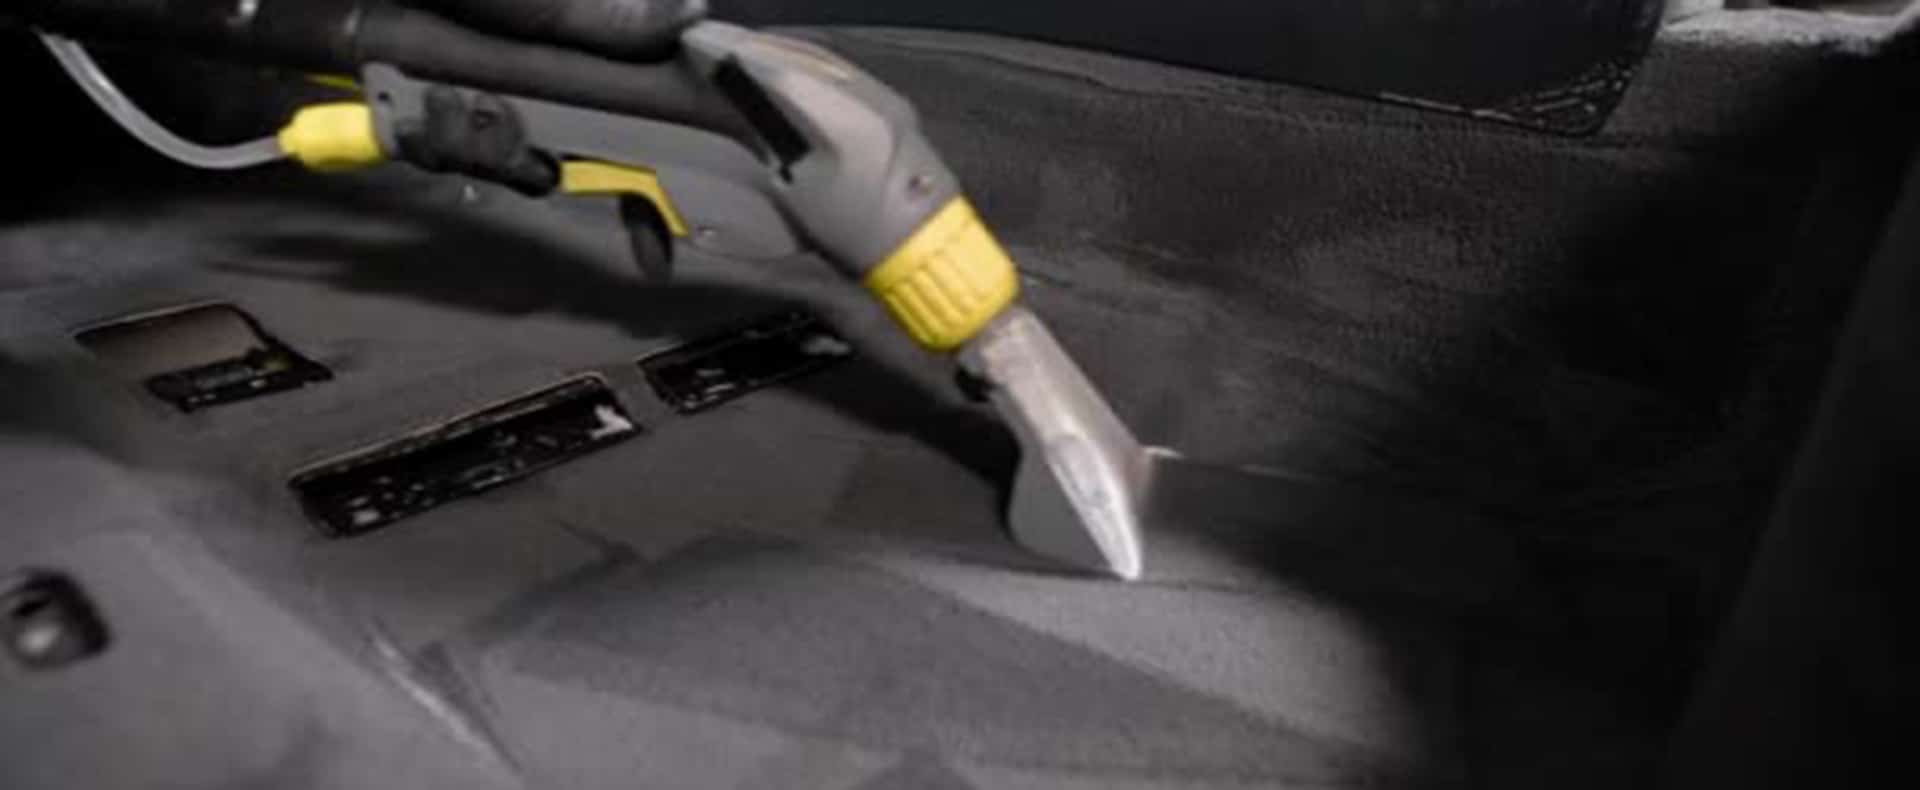 There's a piece of equipment shown on a car floor, actively cleaning the carpet and removing stains.